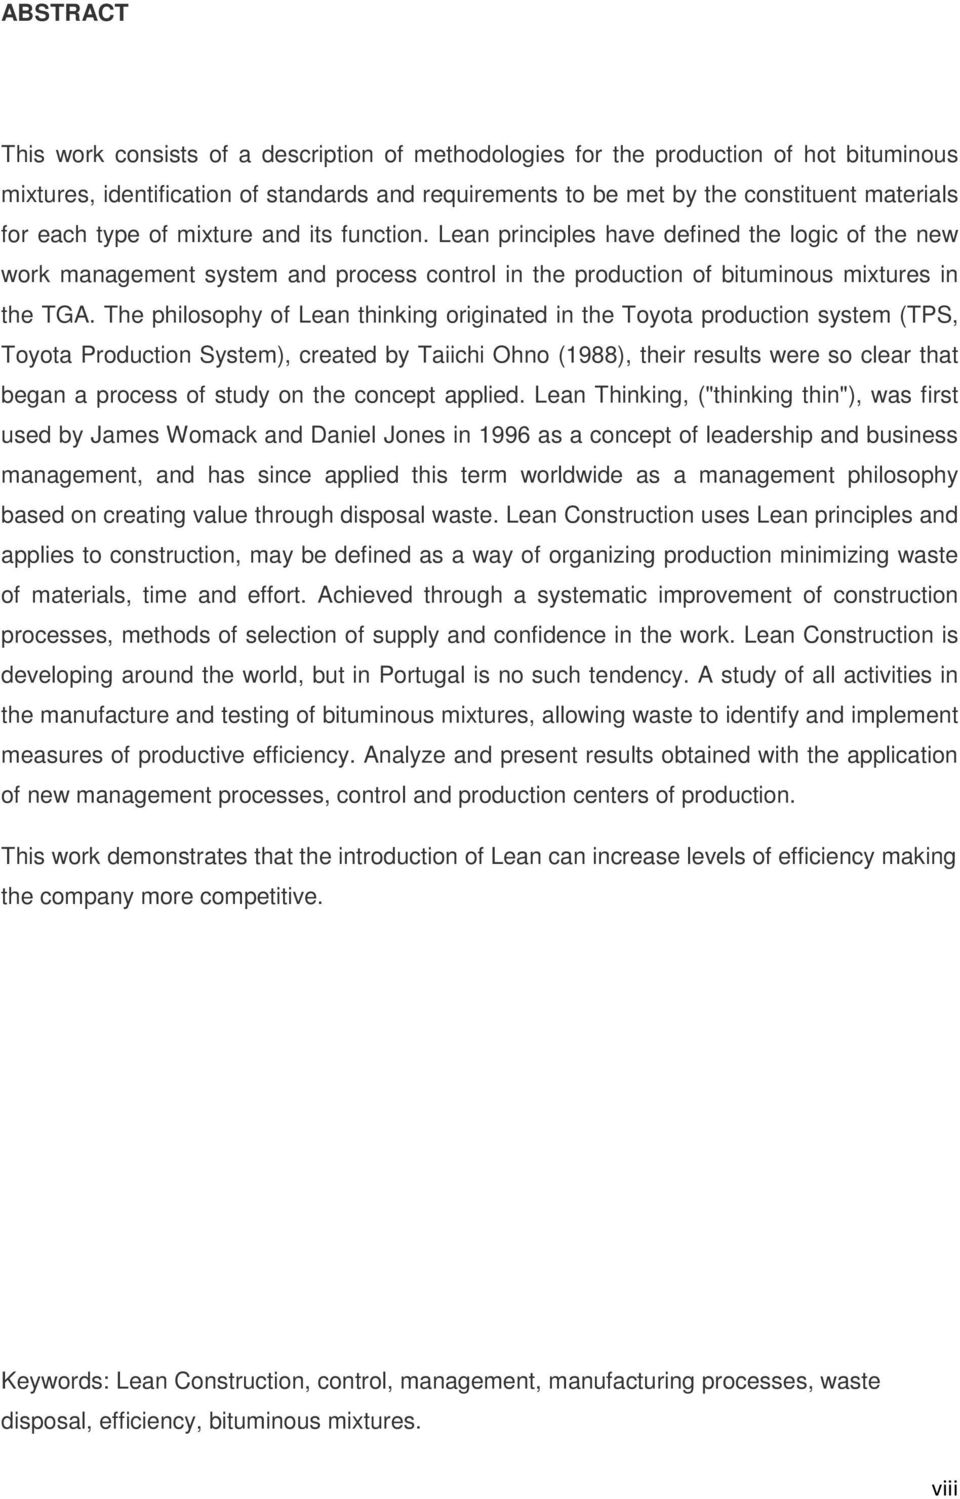 The philosophy of Lean thinking originated in the Toyota production system (TPS, Toyota Production System), created by Taiichi Ohno (1988), their results were so clear that began a process of study